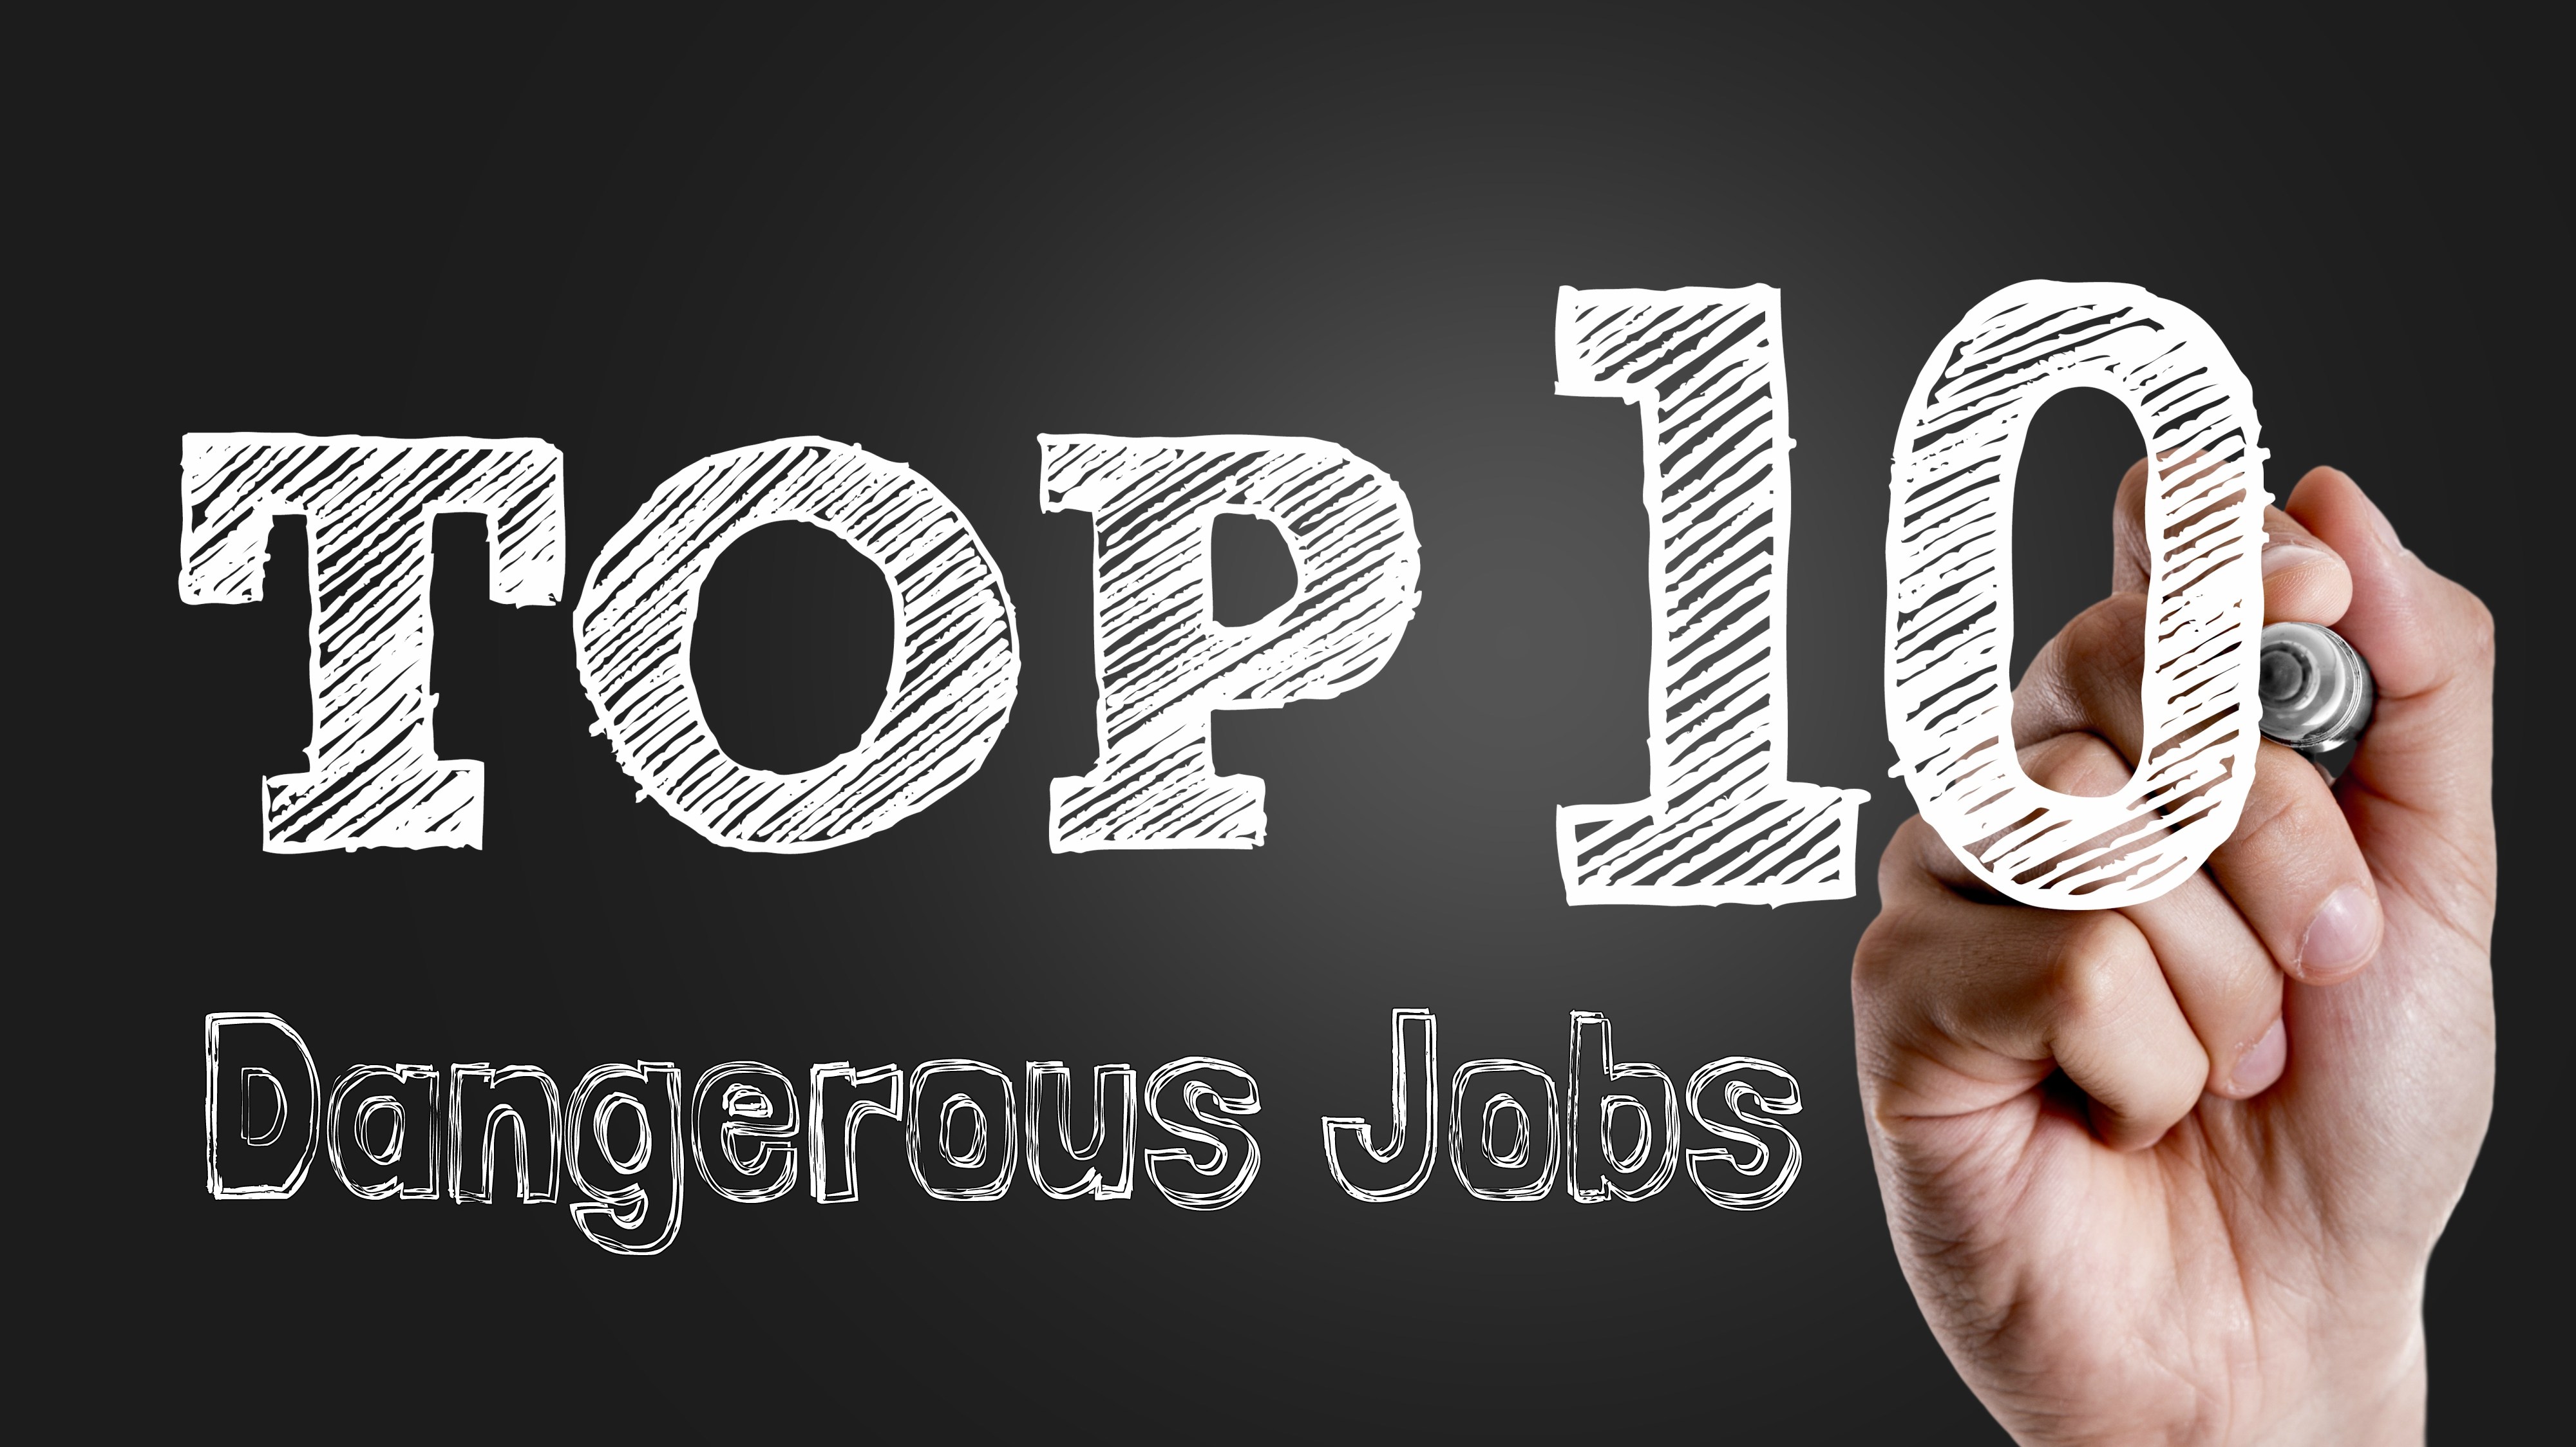 Top 10 most dangerous jobs that pay well but are deadly